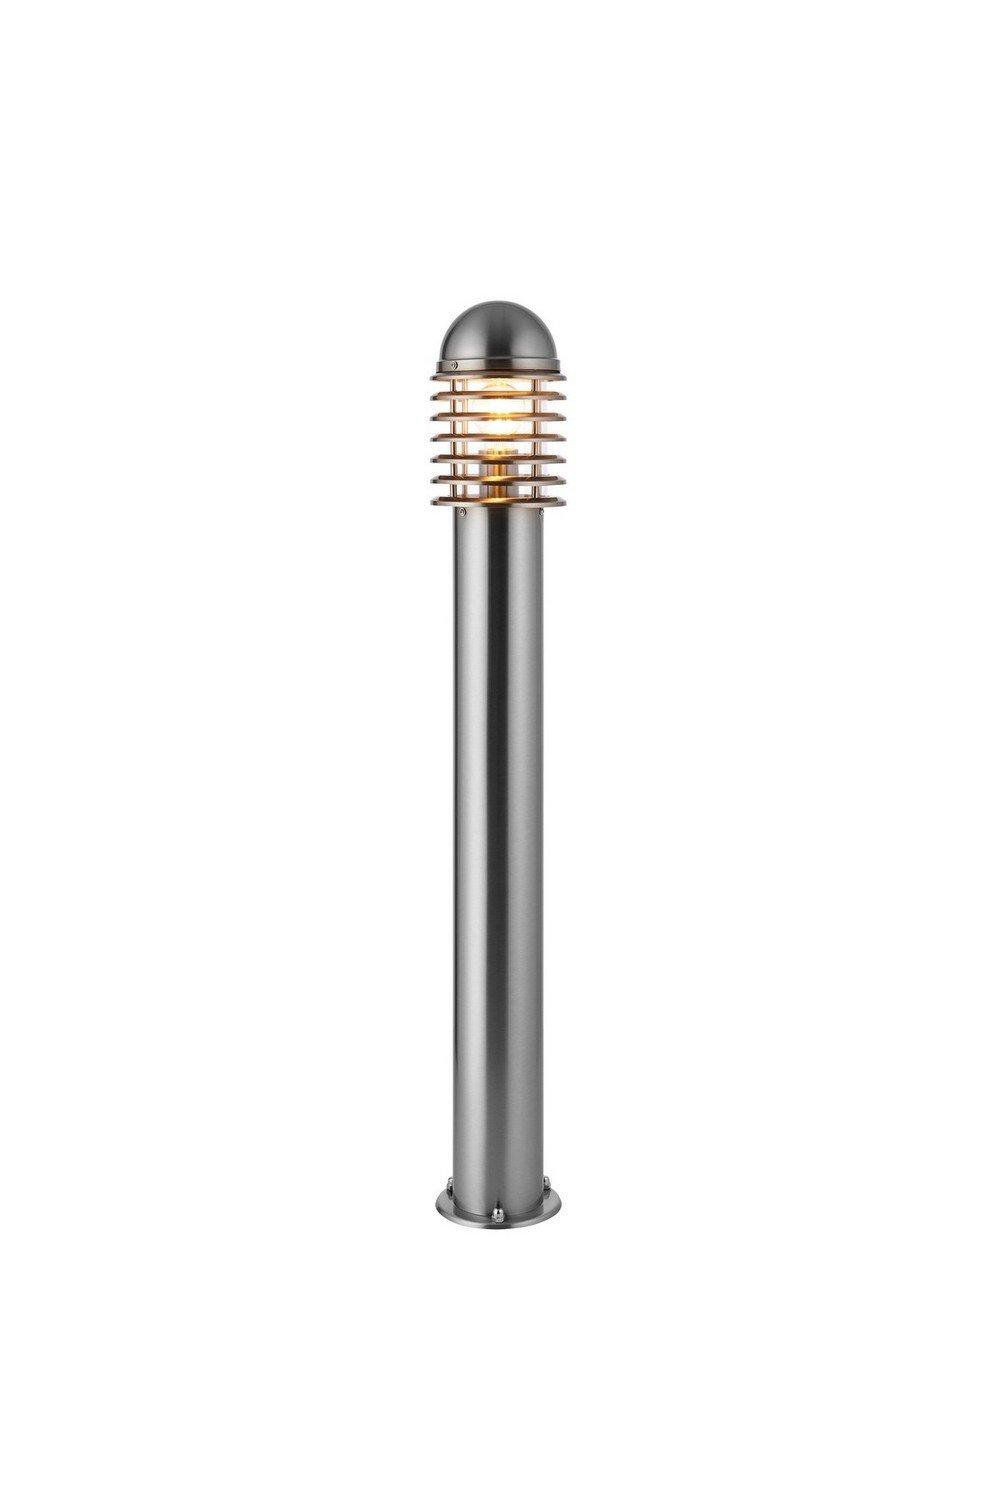 Louvre Outdoor Bollard Light Polished Stainless Steel Clear Polycarbonate IP44 E27